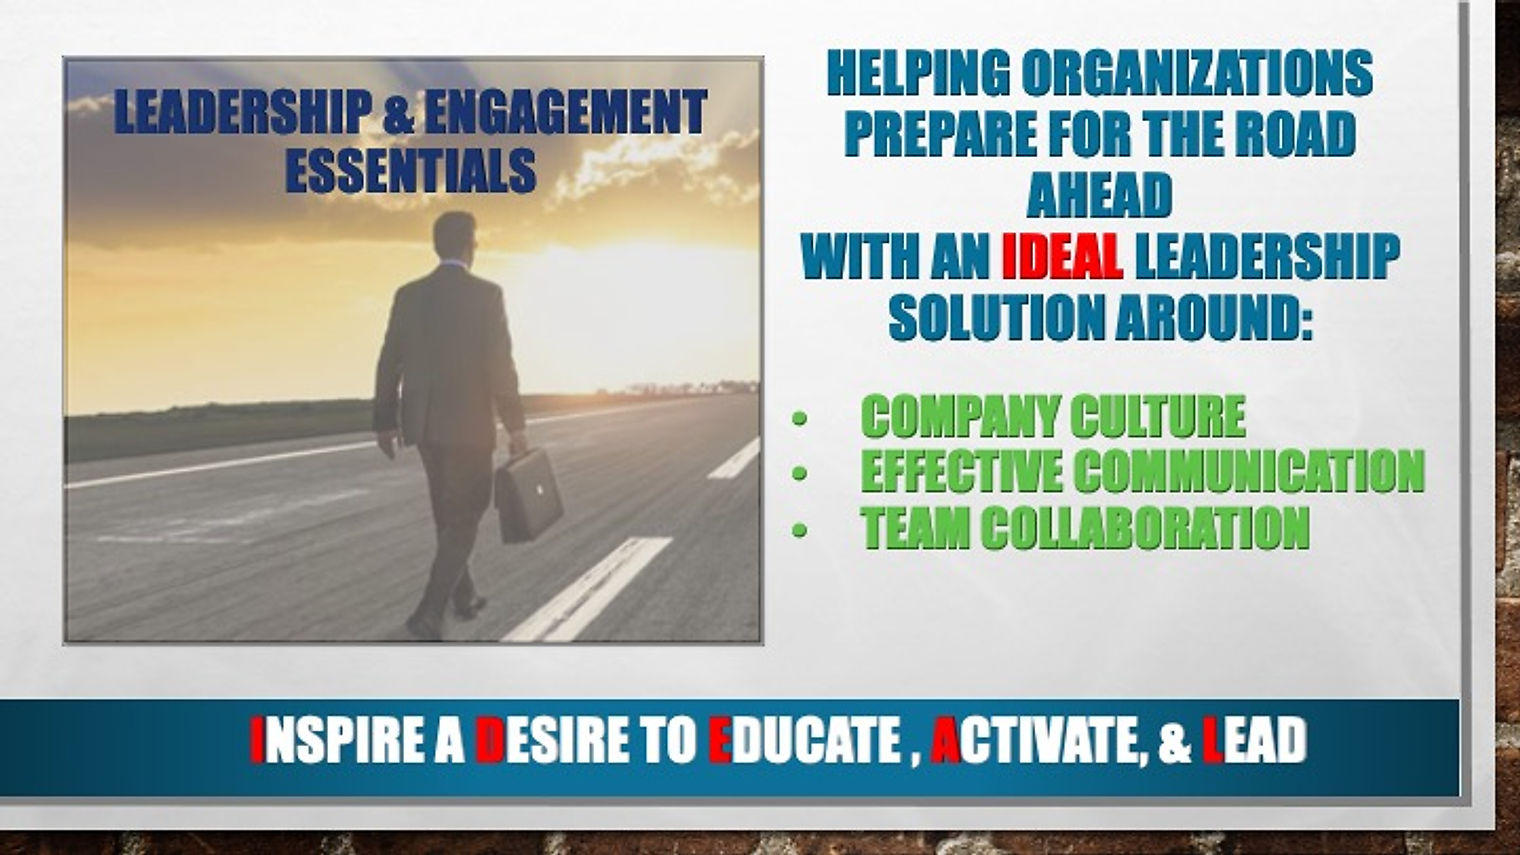 Leadership and Engagement Essentials